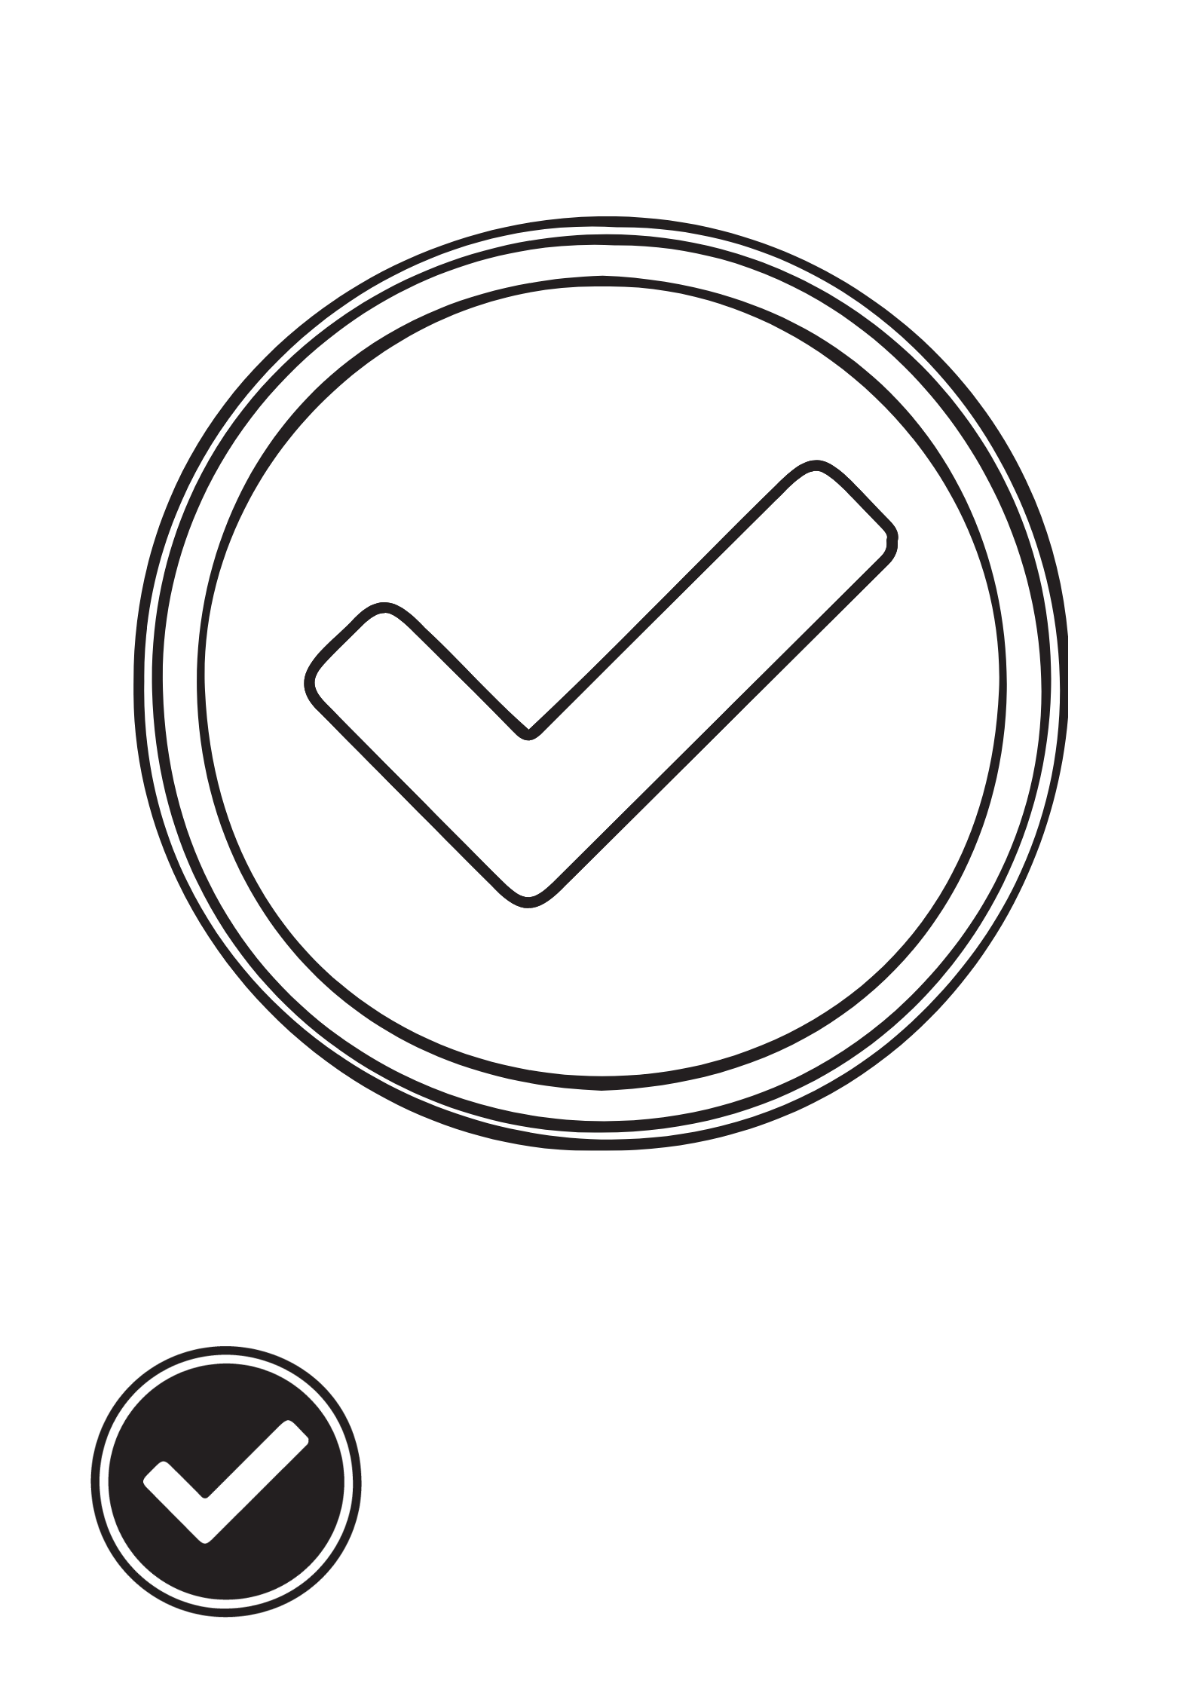 Round Black Tick Mark coloring page Template